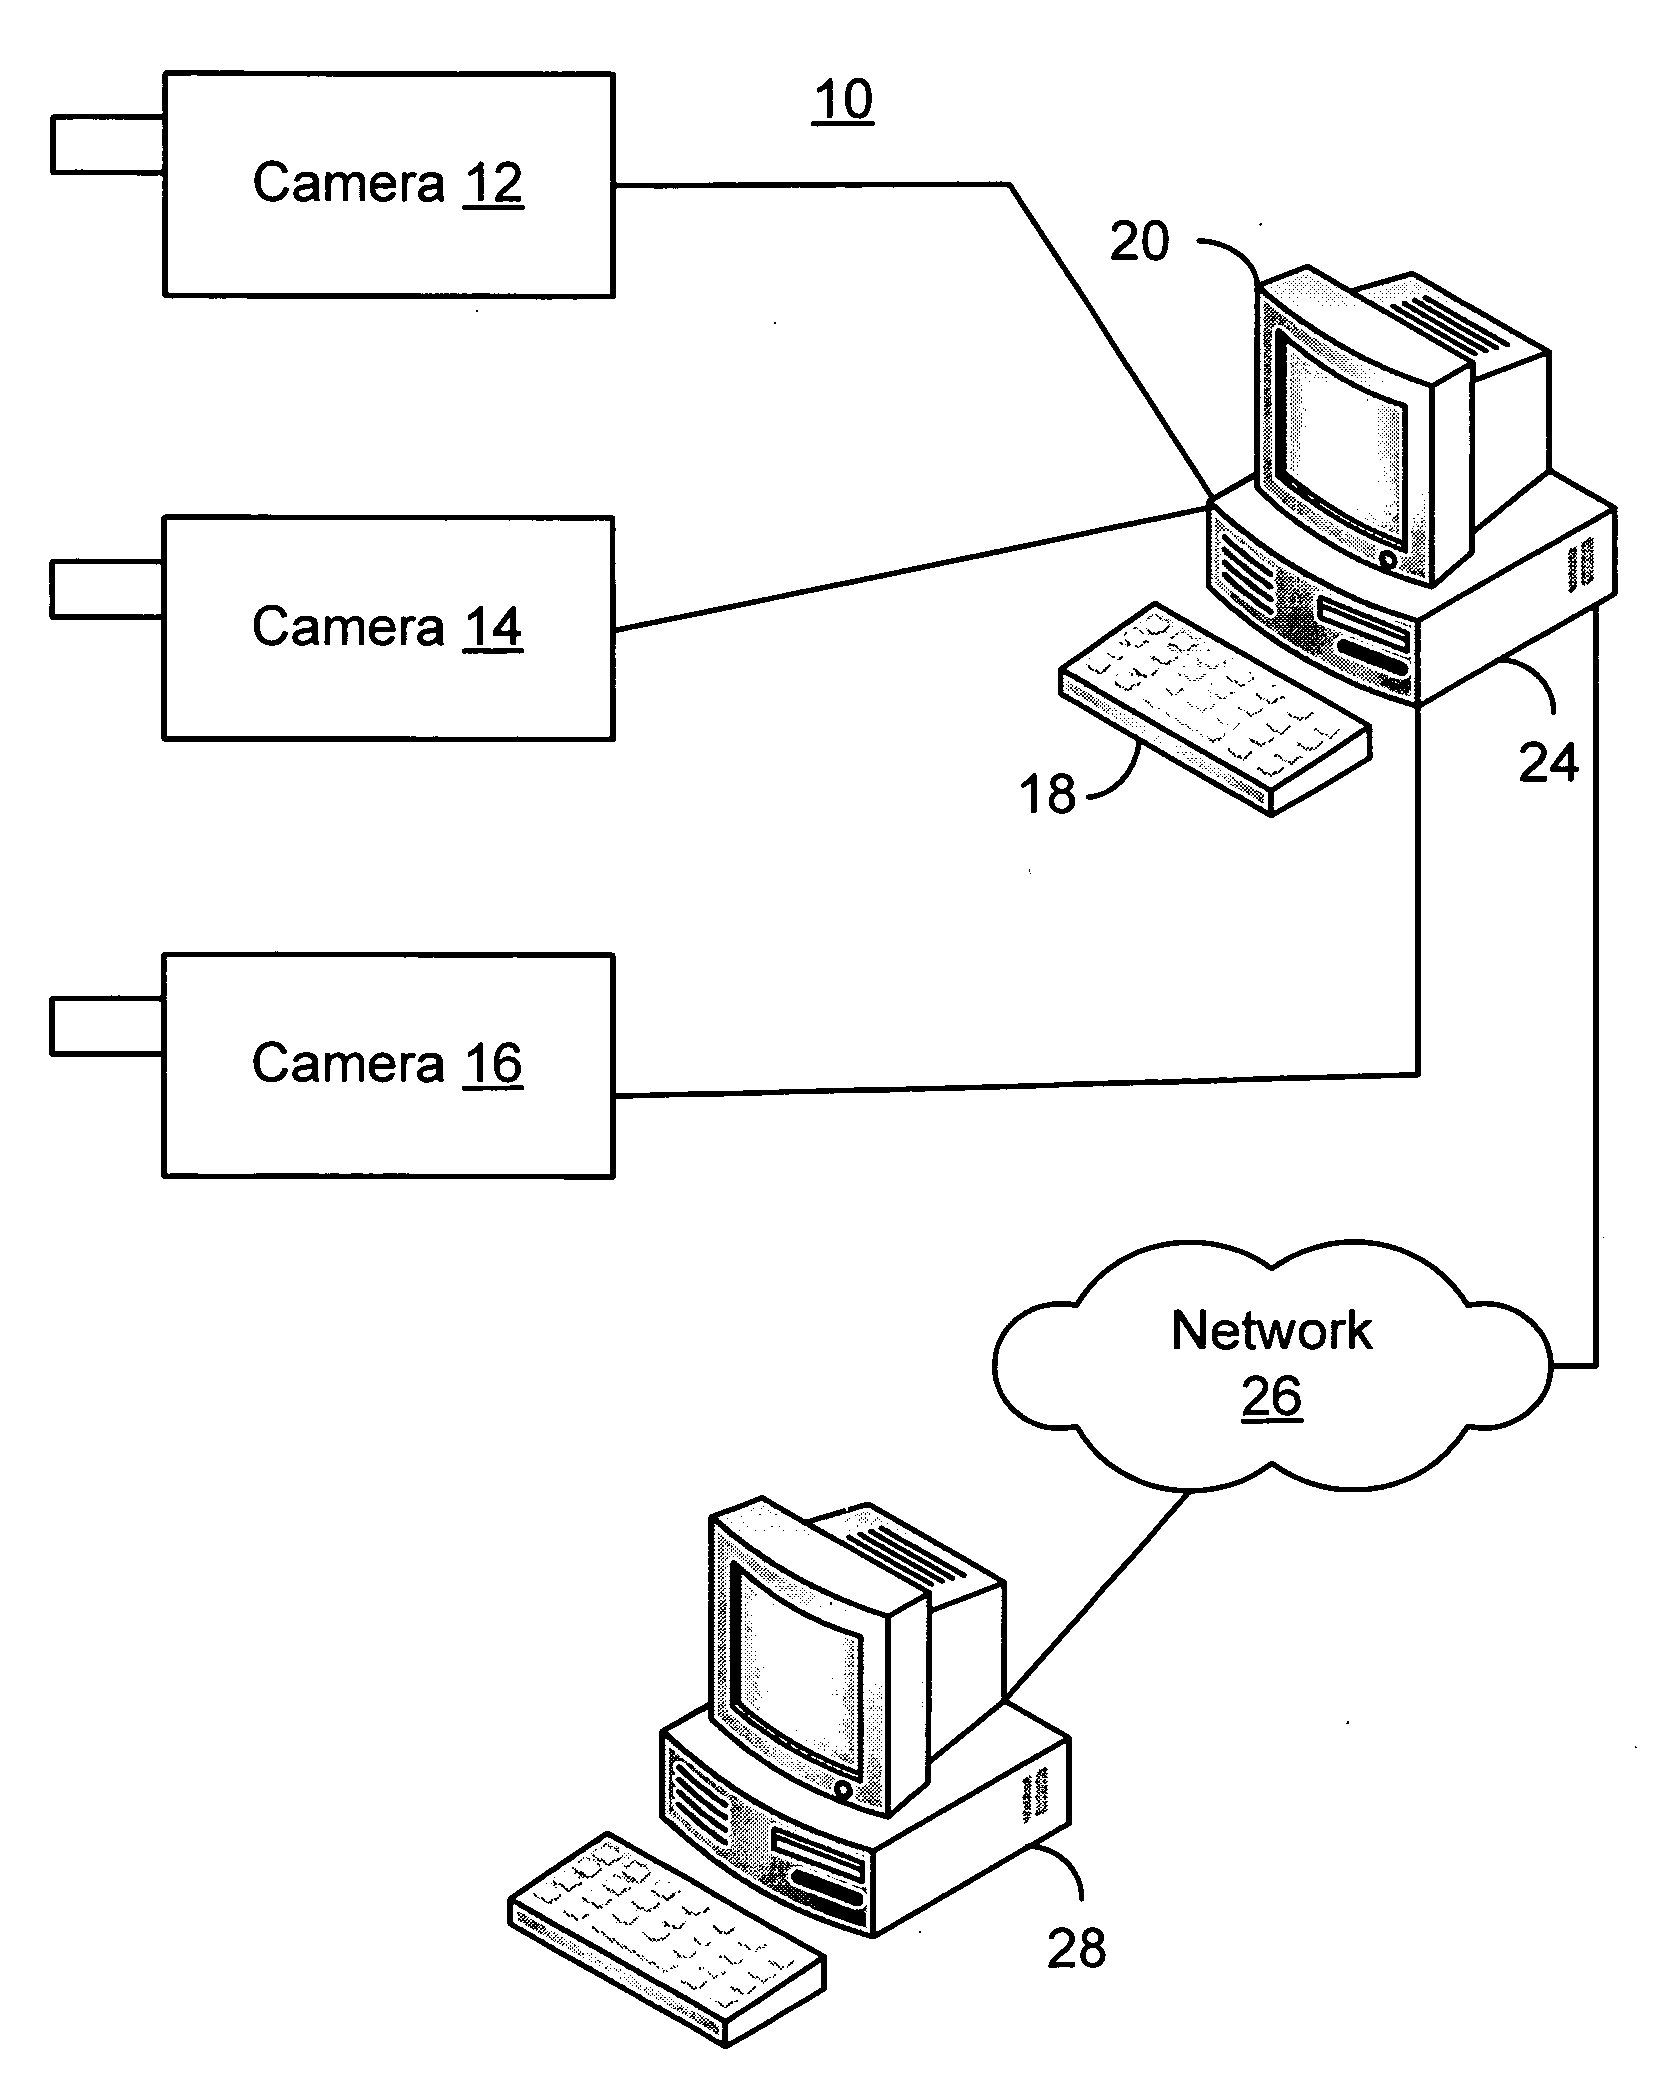 Image and video stitching and viewing method and system